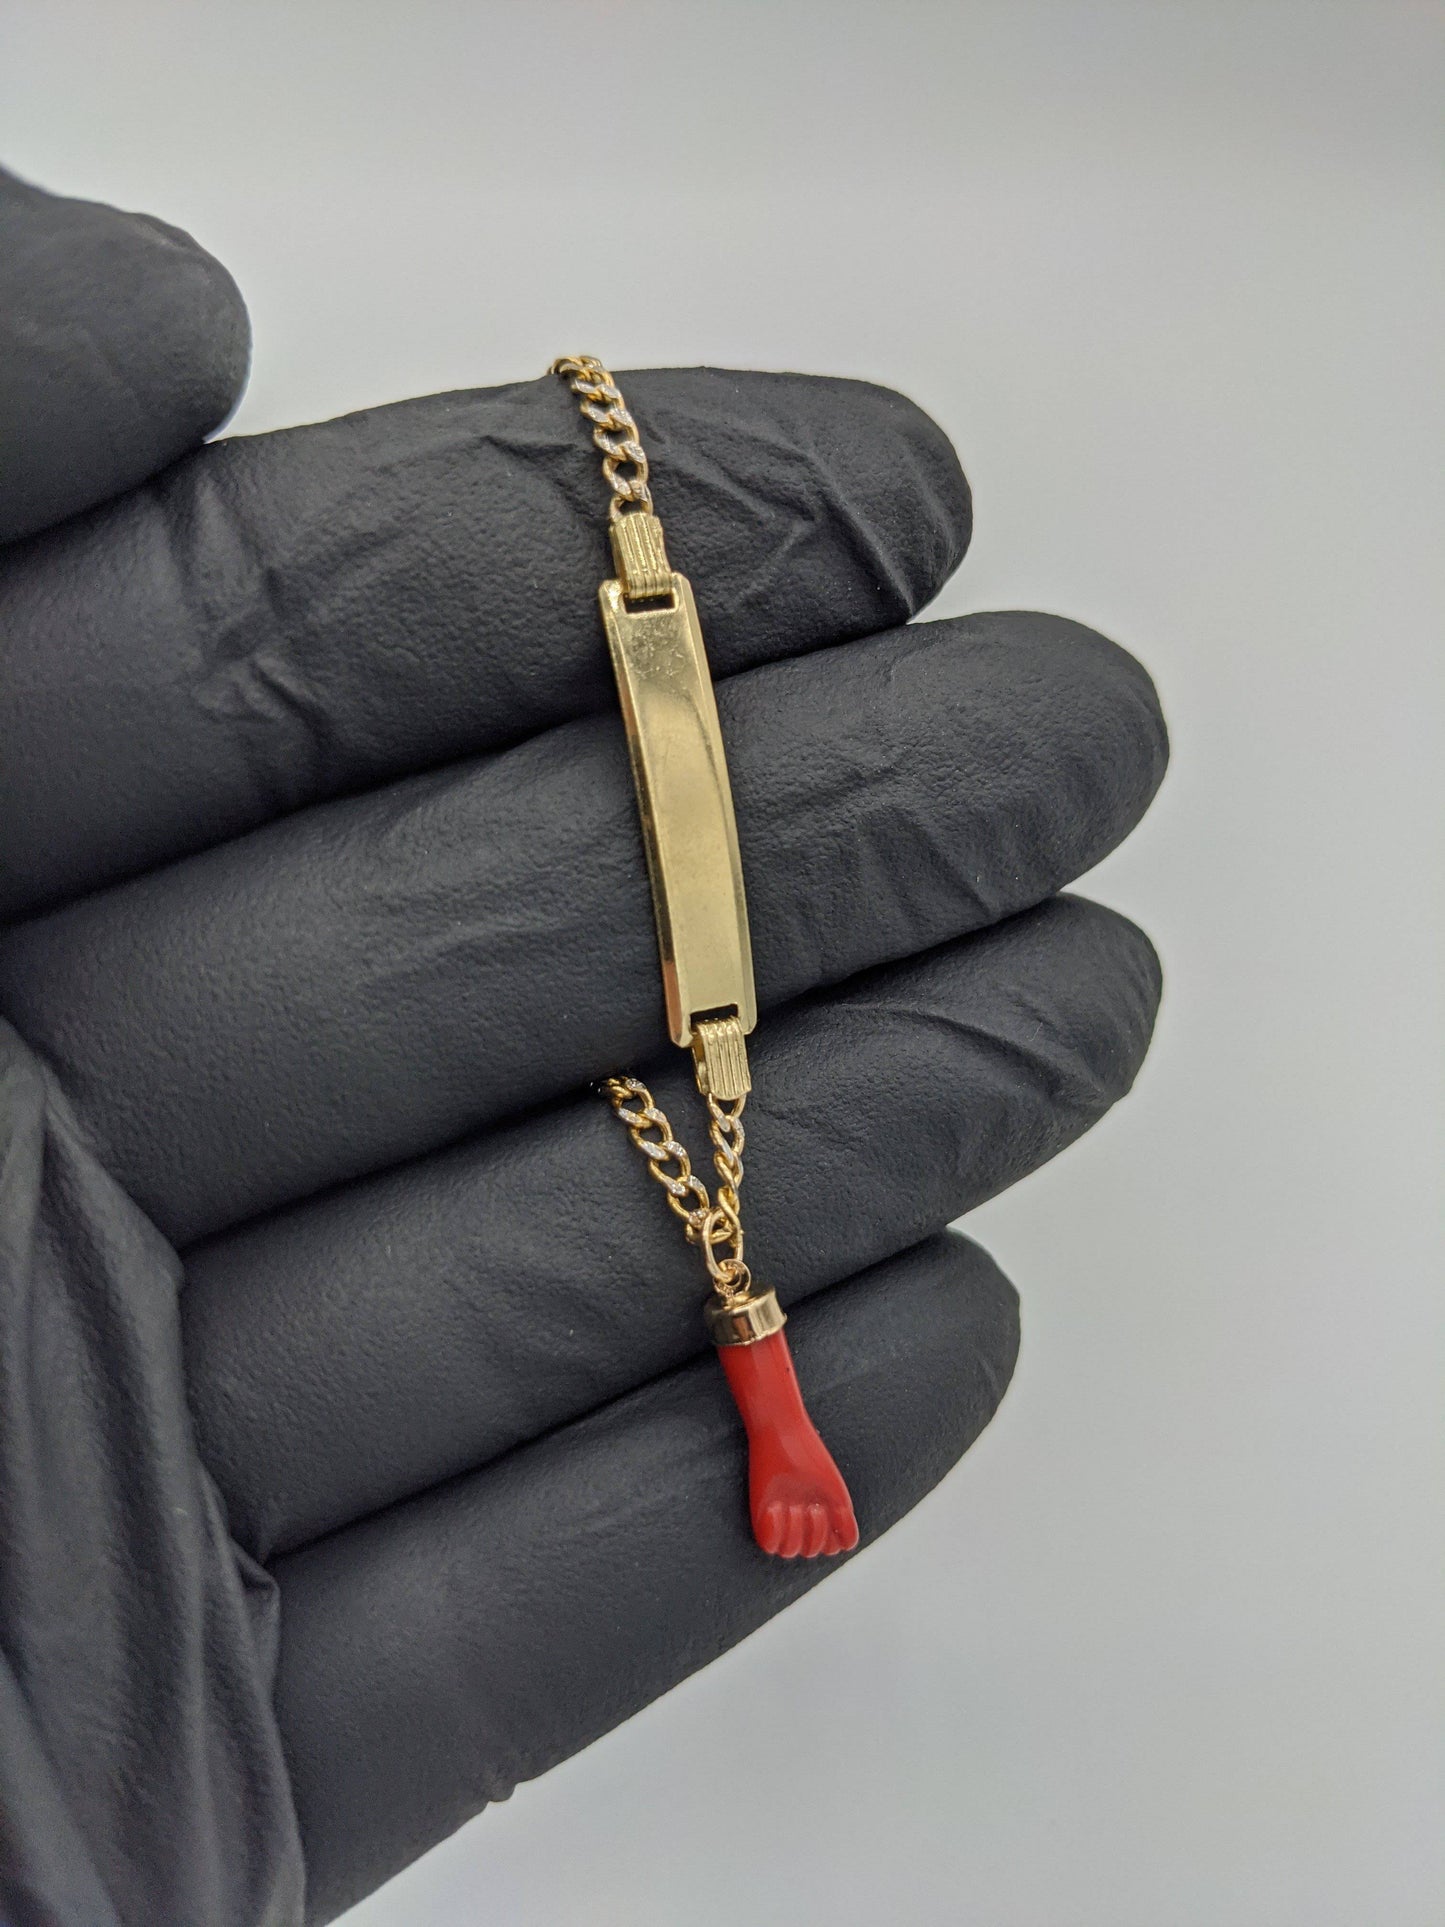 14K Baby Miami Cuban Link Bracelet With Amulet (Red - asabache)  two tones by GD ™ - Gold Drip Jewelry